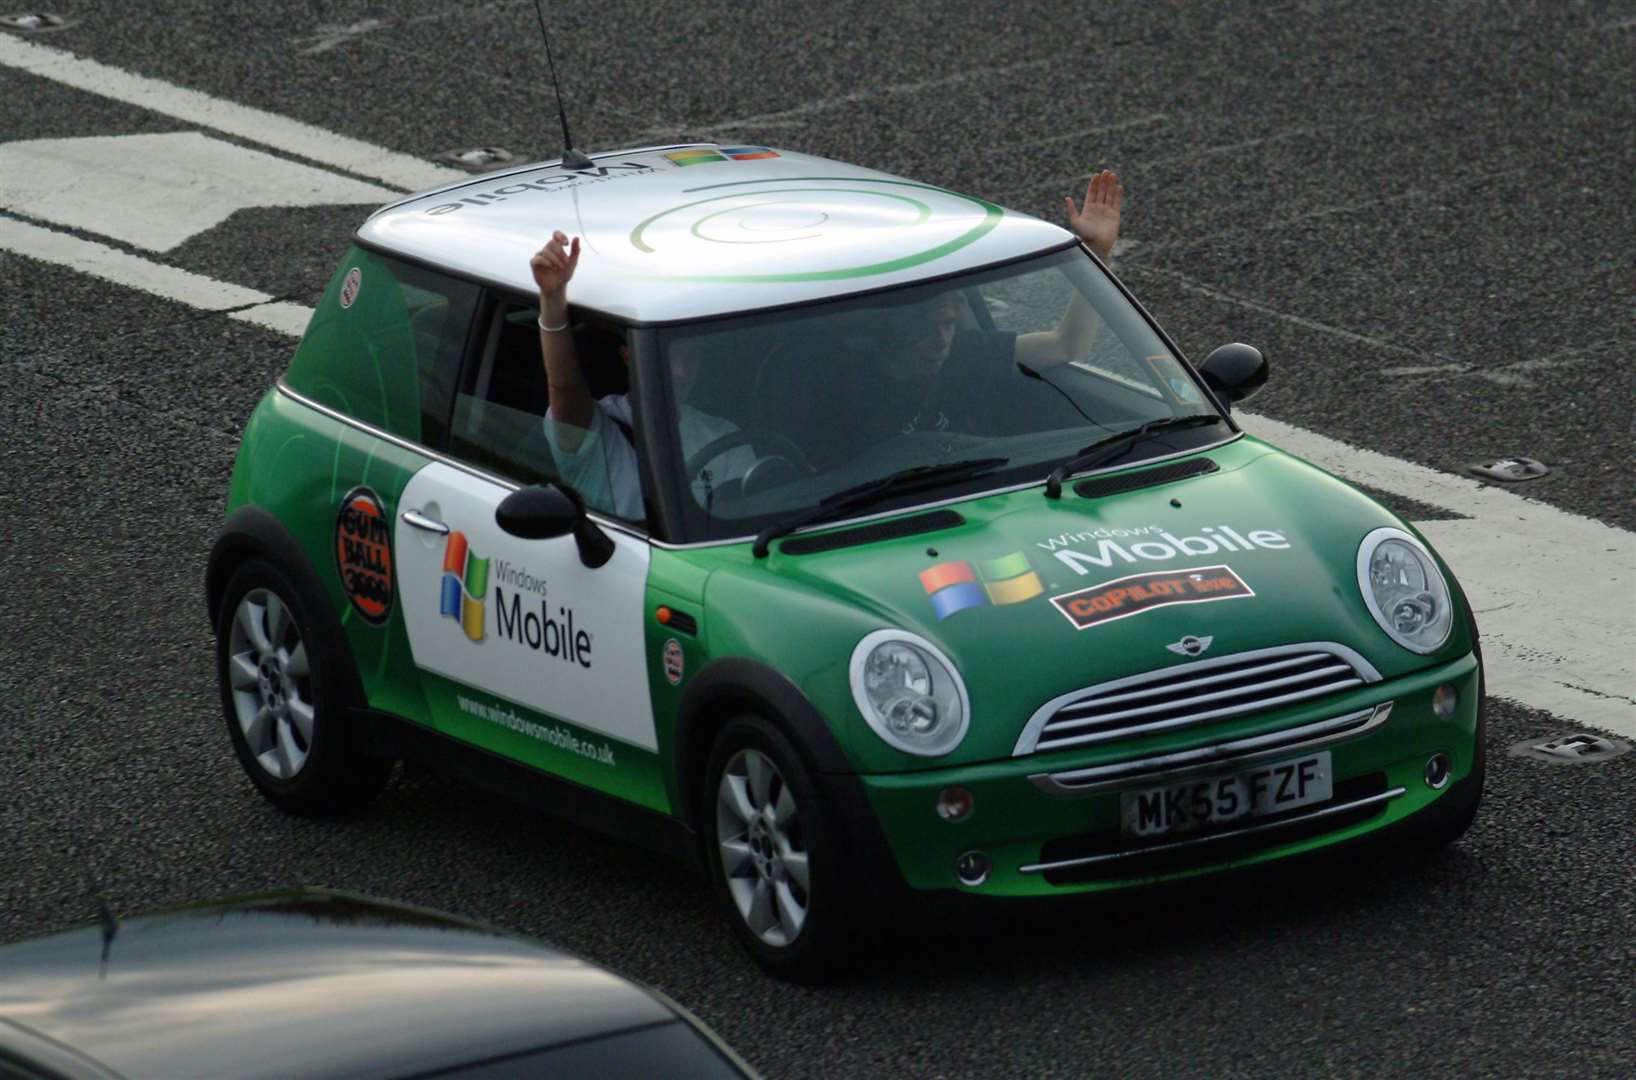 A BMW MINI crew wave to the crowd in 2006